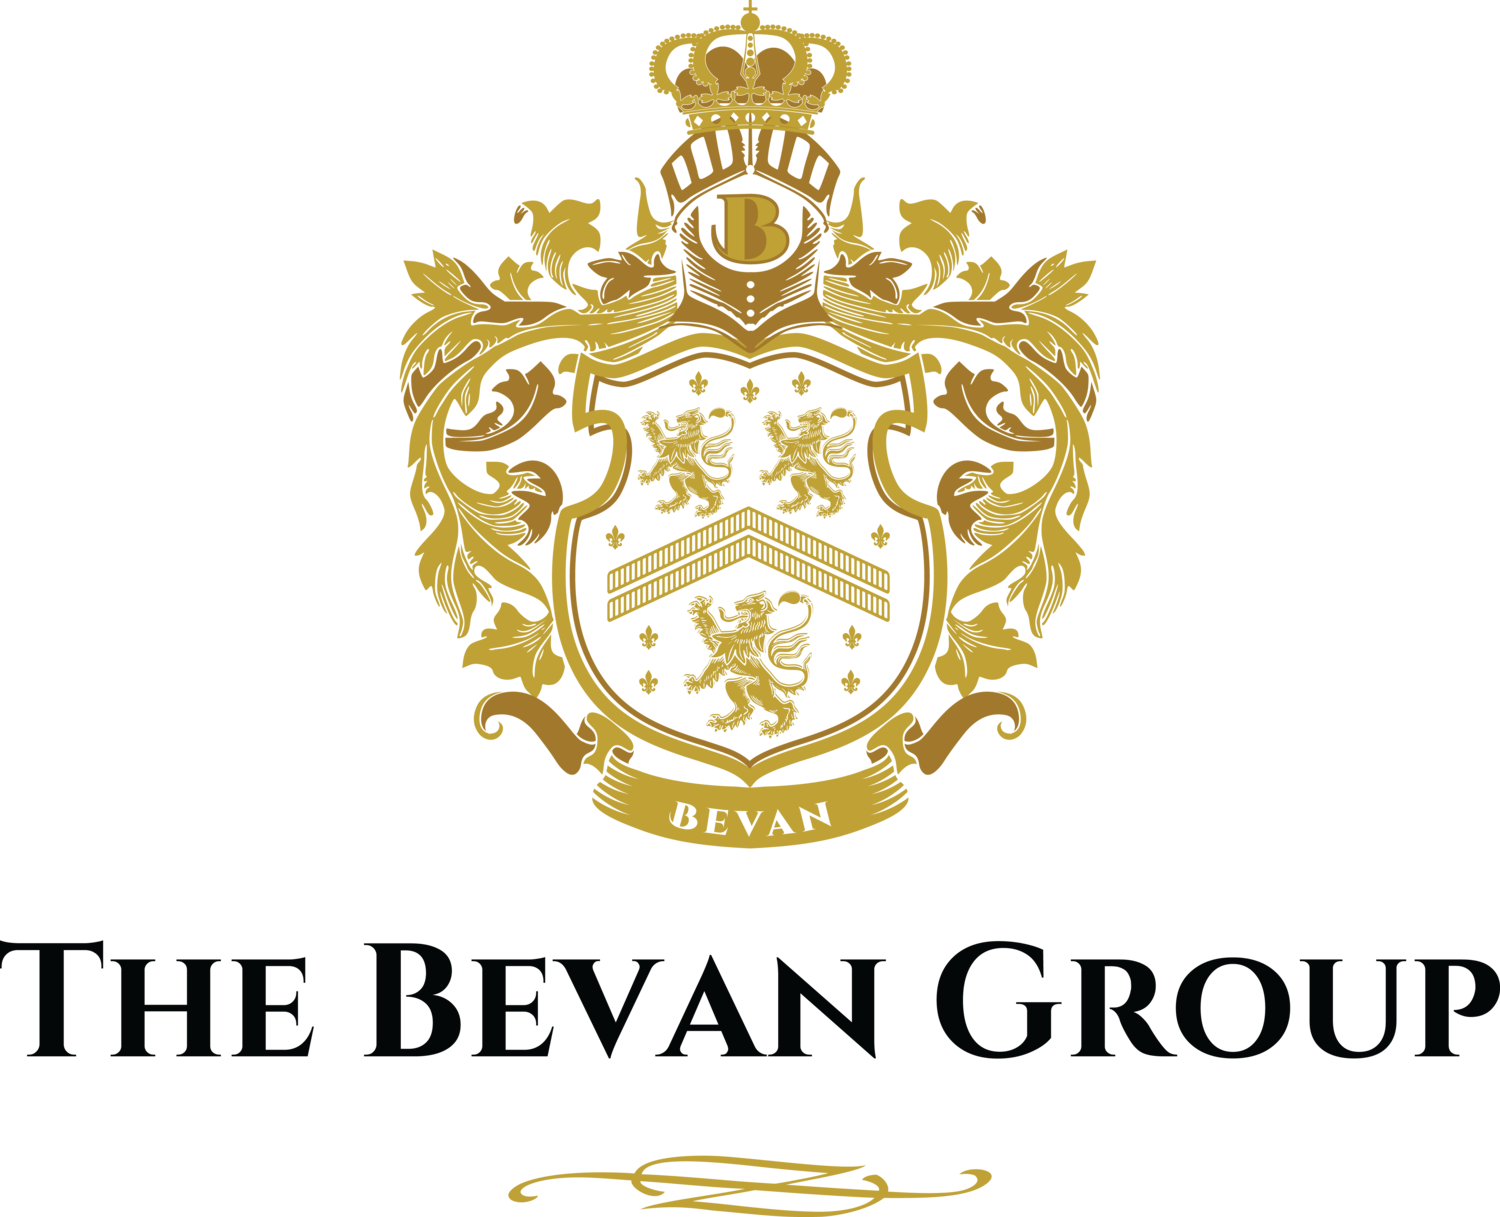 The Bevan Group